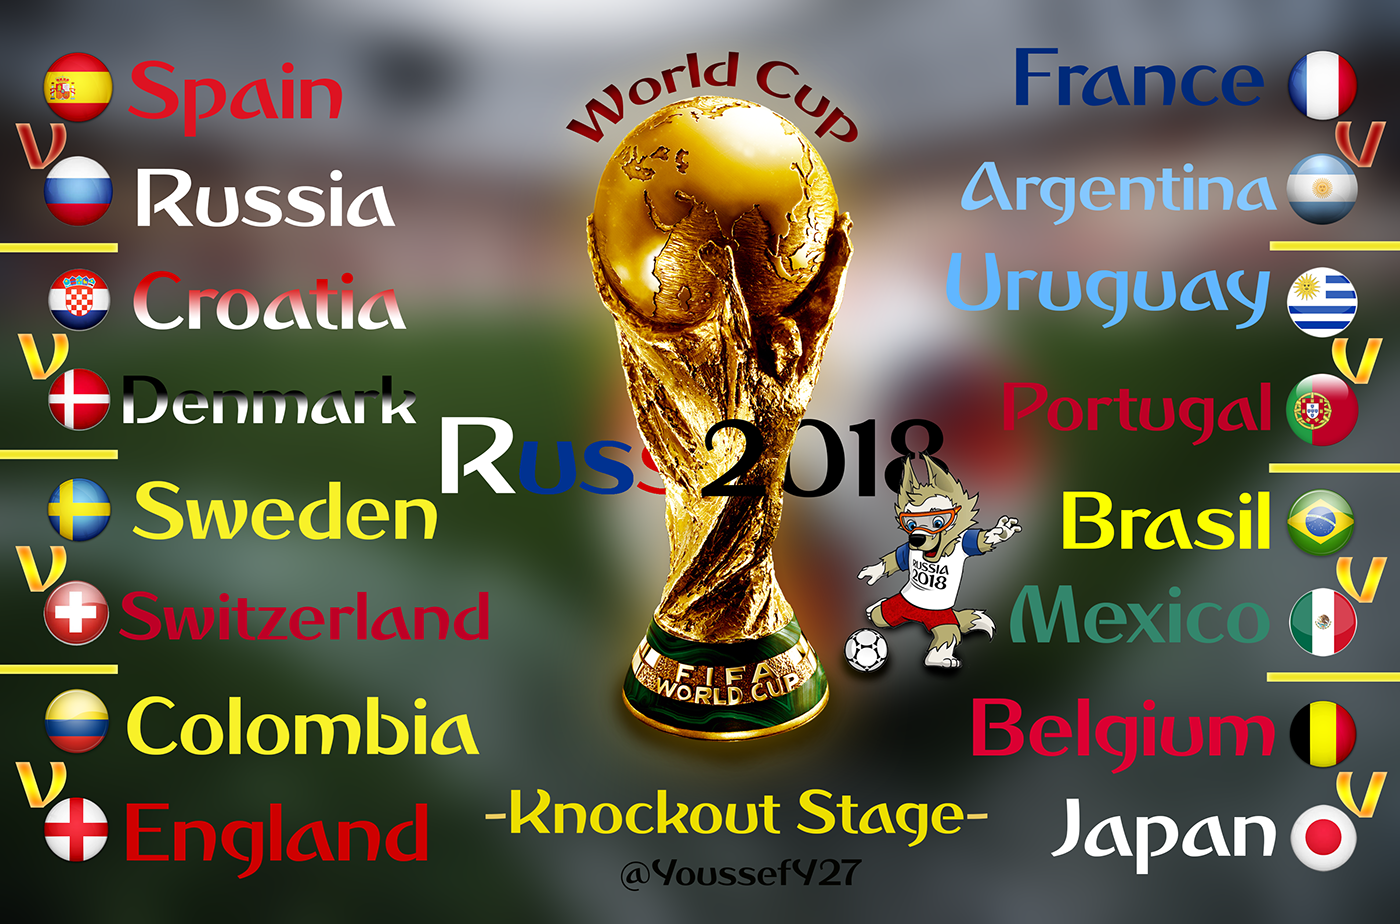 world cup FIFA world cup wc2018 knockout Stage round Russia match